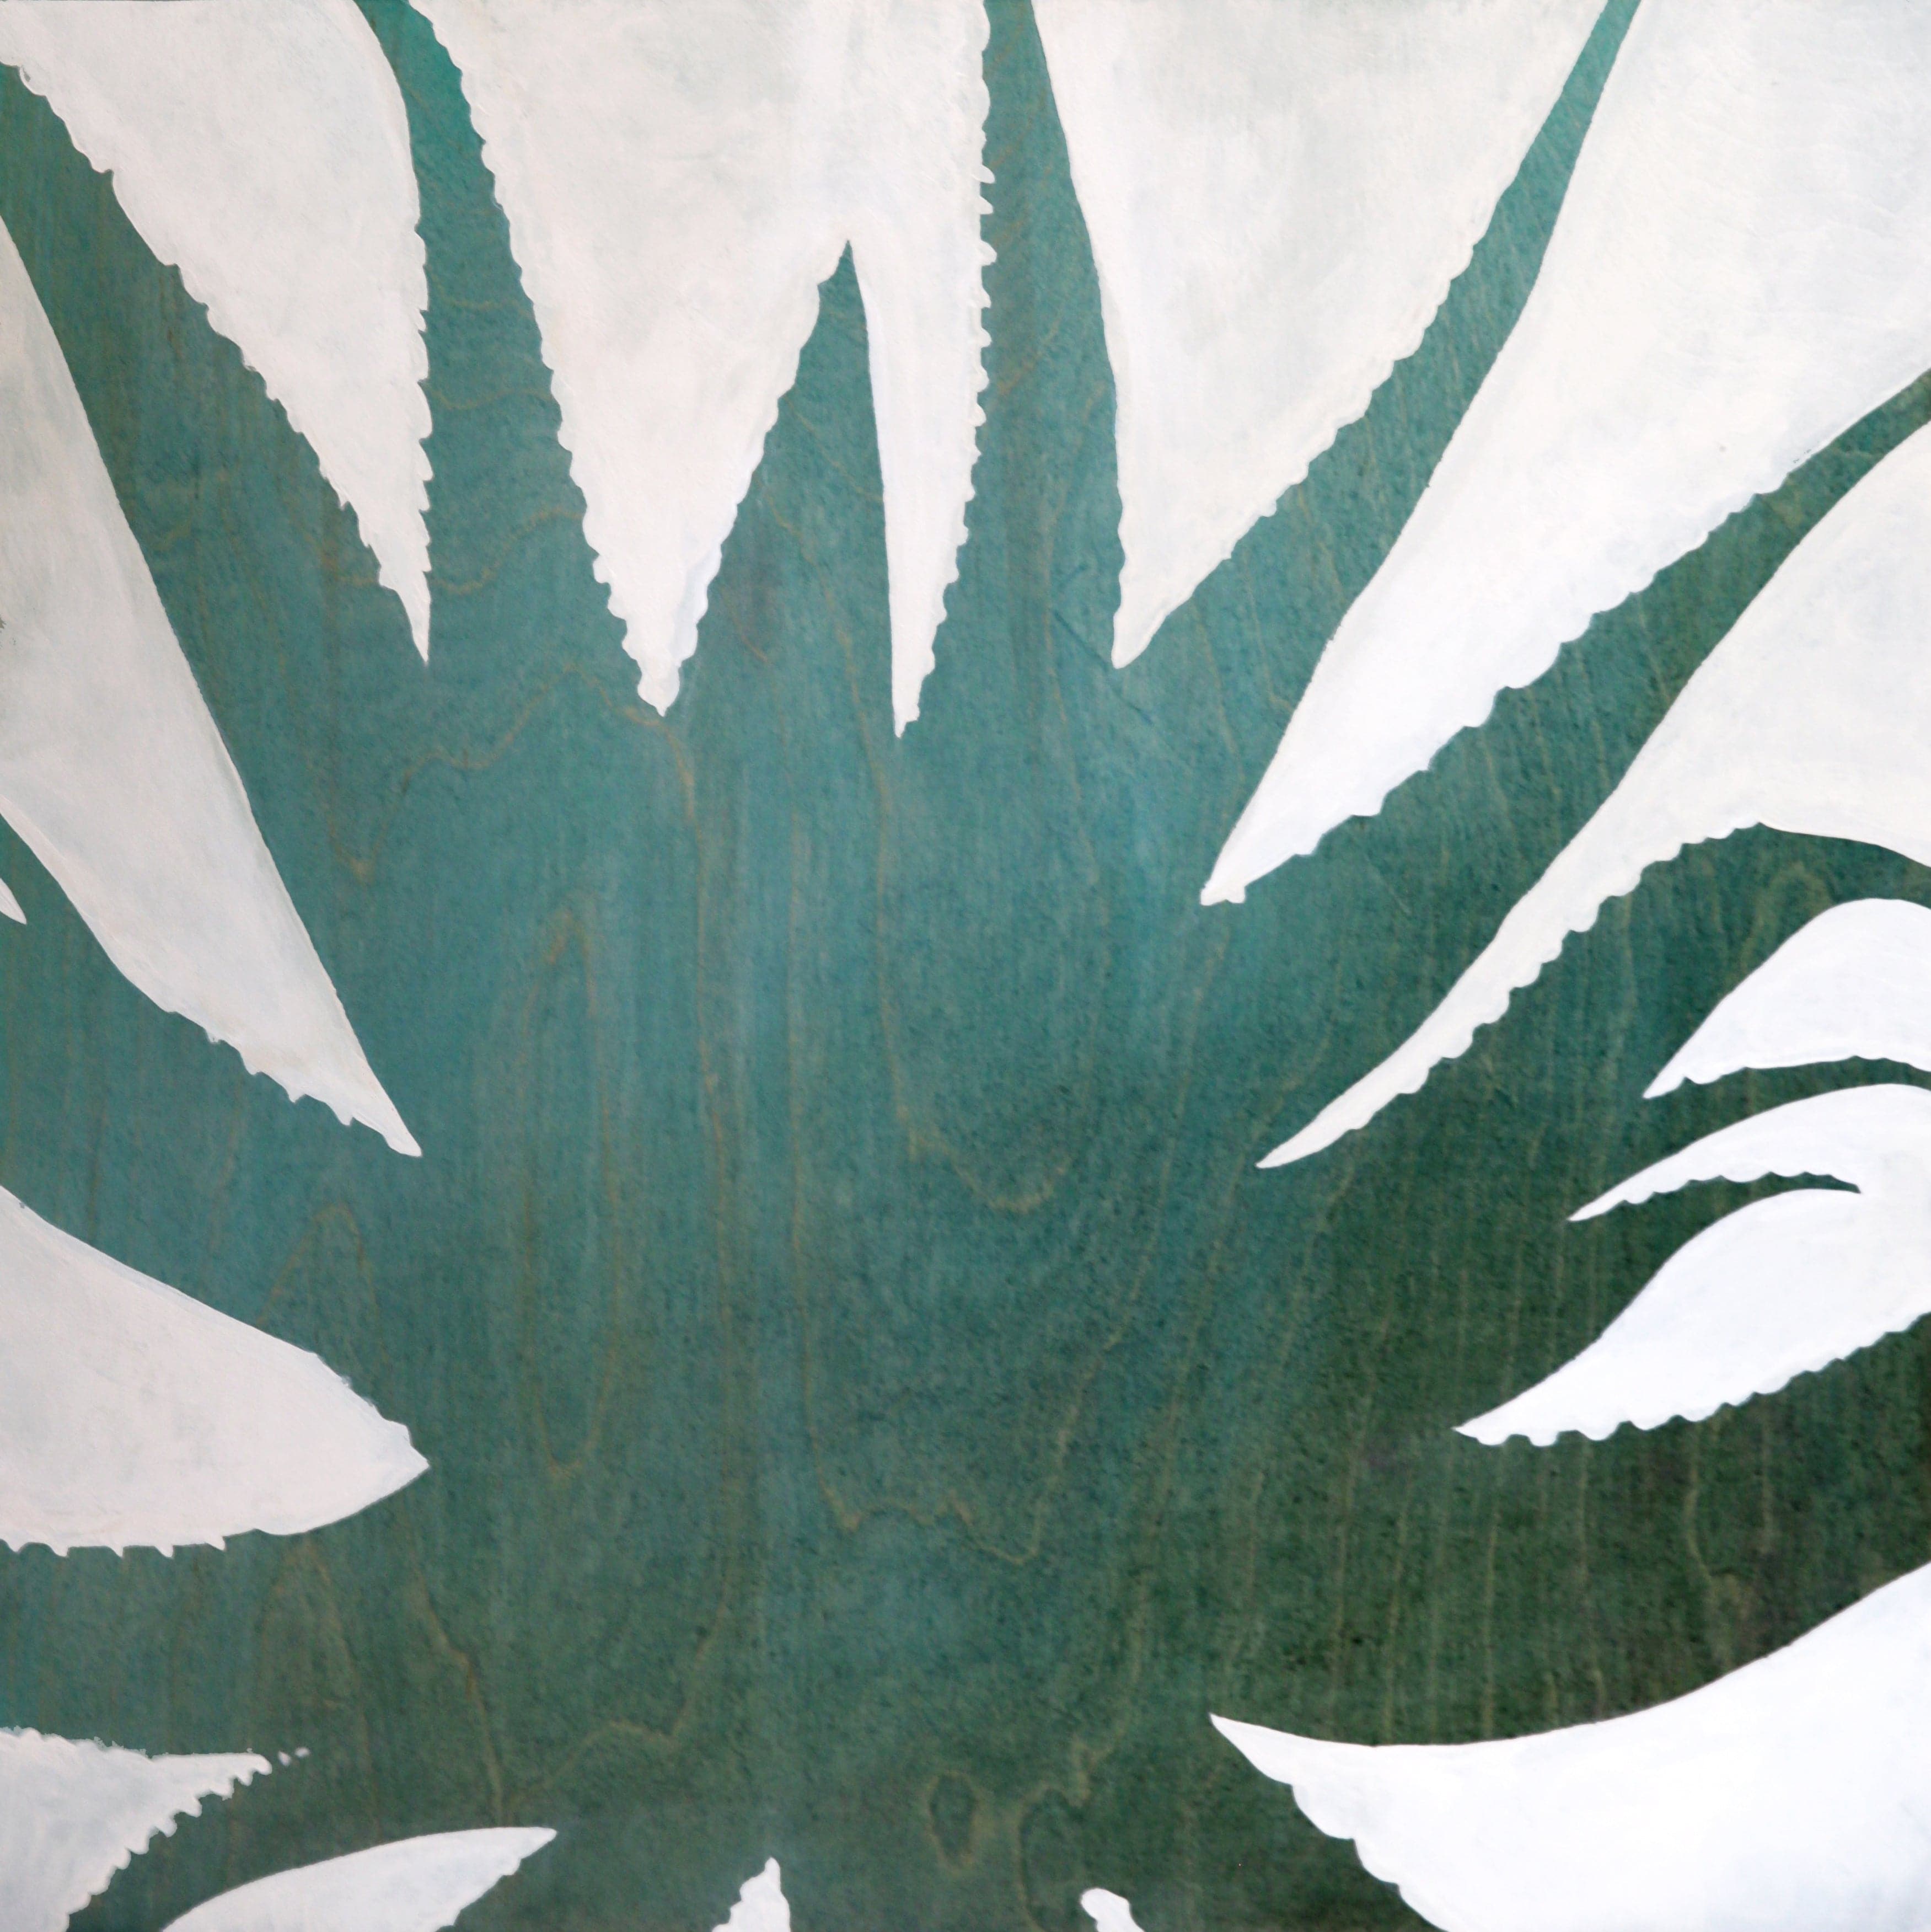 Original painting of a silhouetted rigged leaf aloe plant in dark aqua color and wood grain texture.